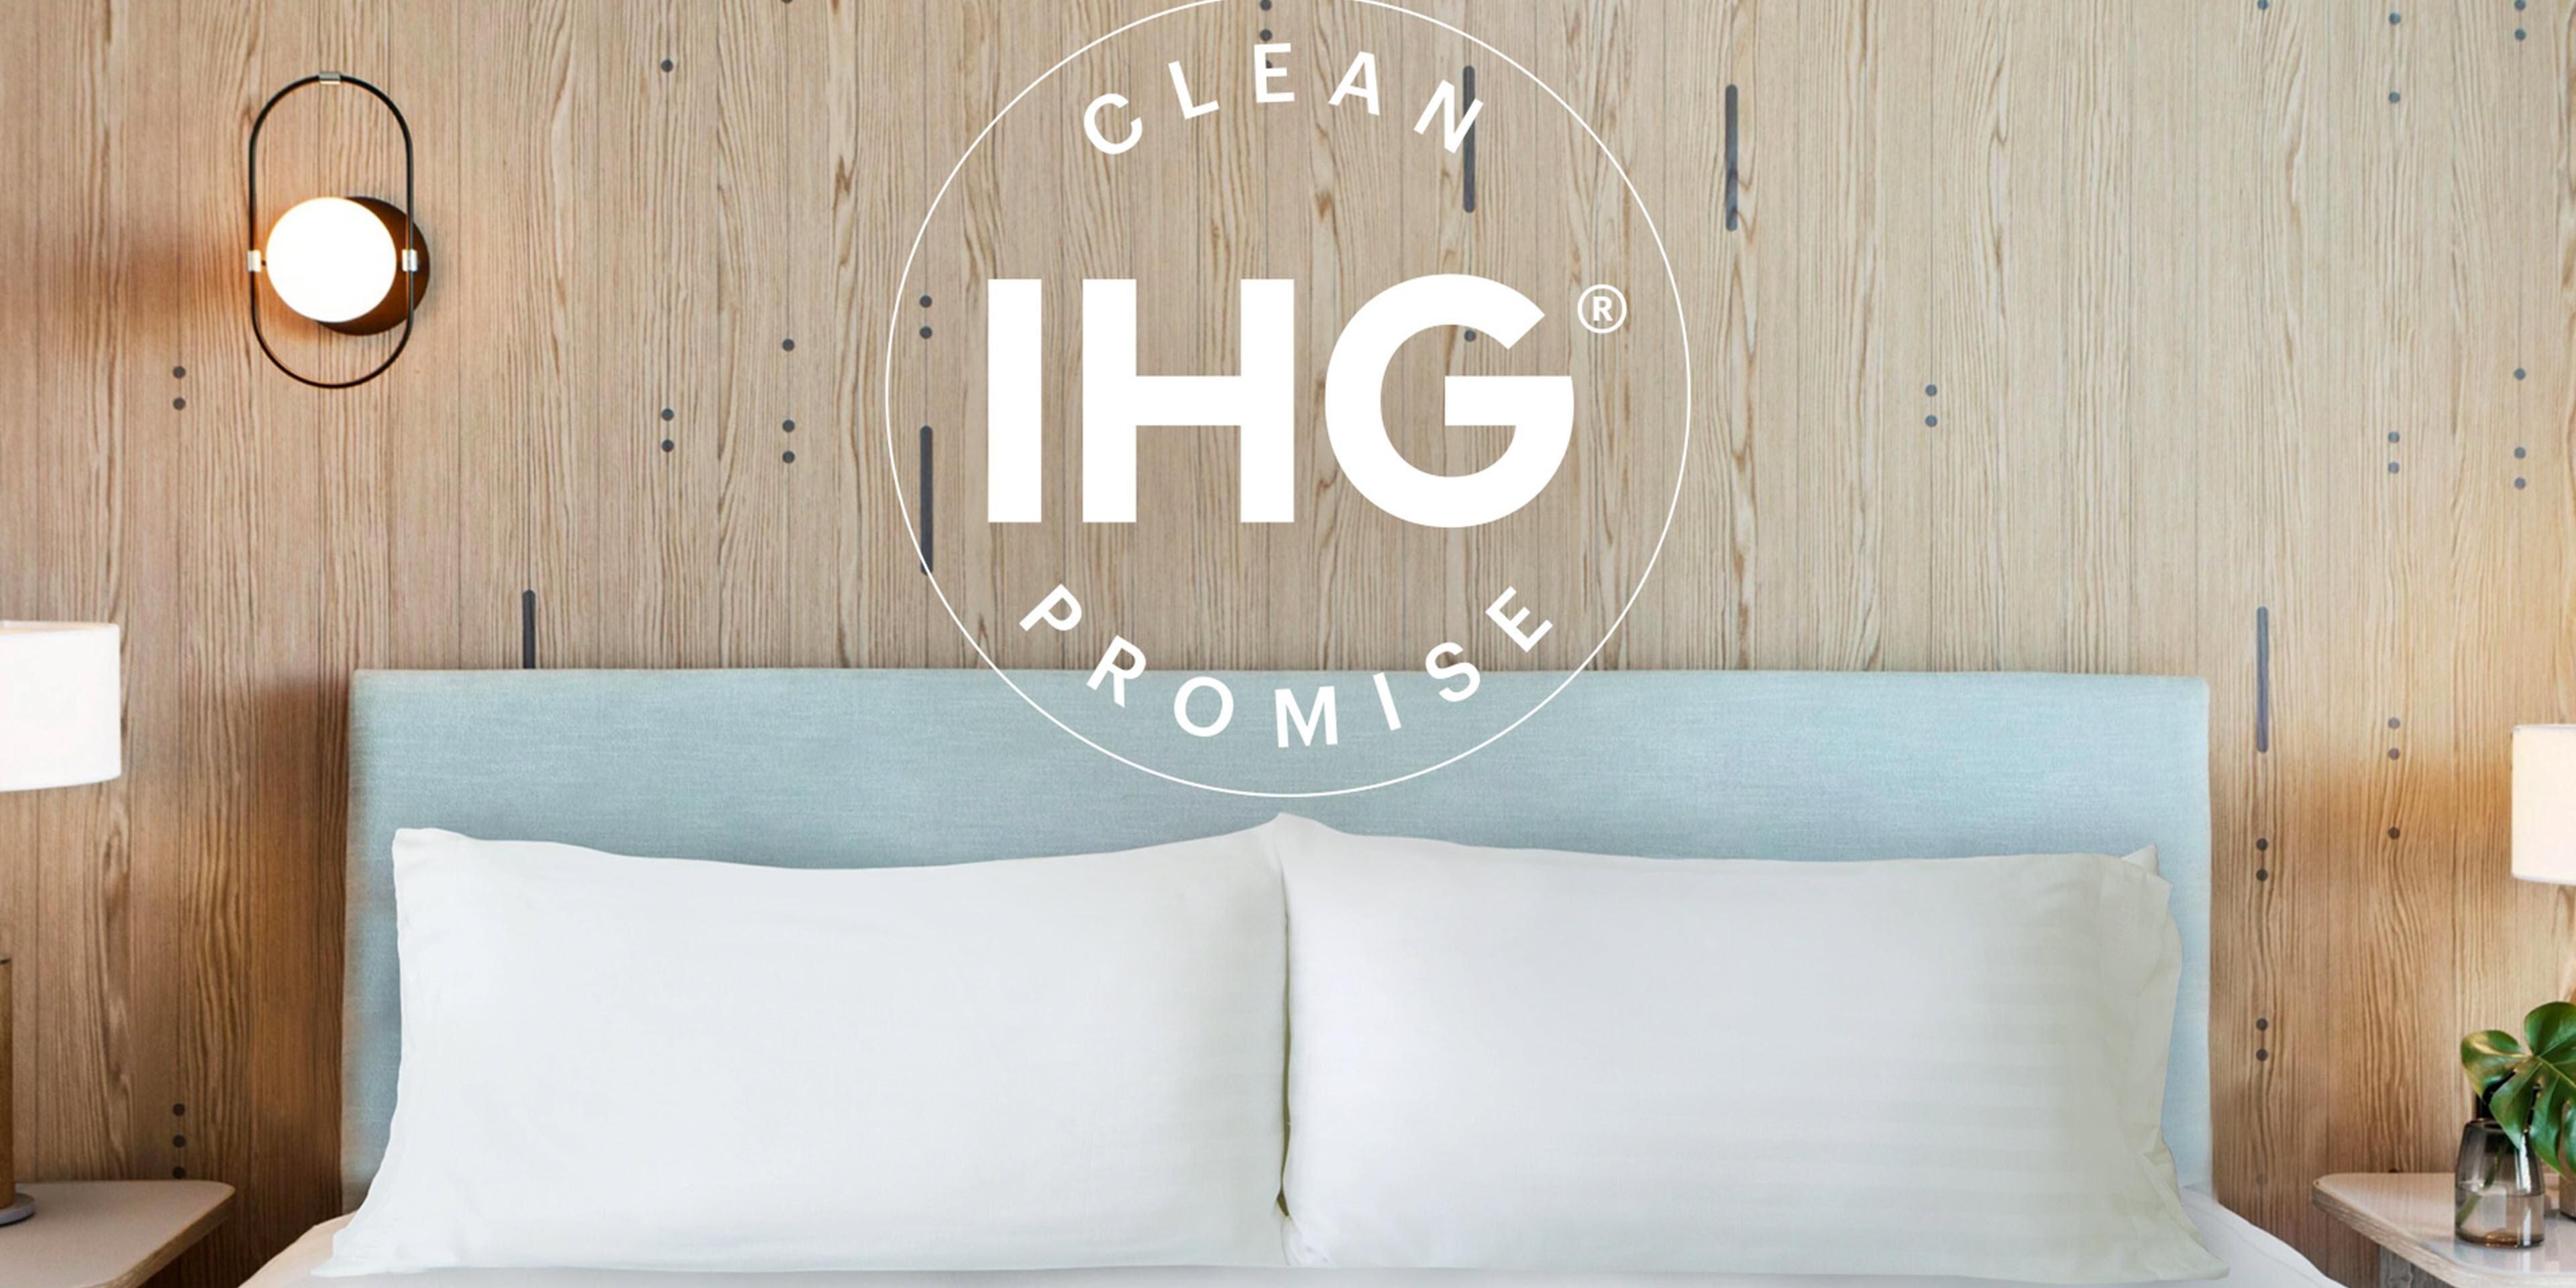 Good isn’t good enough –we’re committed to high levels of cleanliness. That means clean, well maintained, clutter free rooms that meet our standards. If this isn’t what you find when you check-in then we promise to make it right.